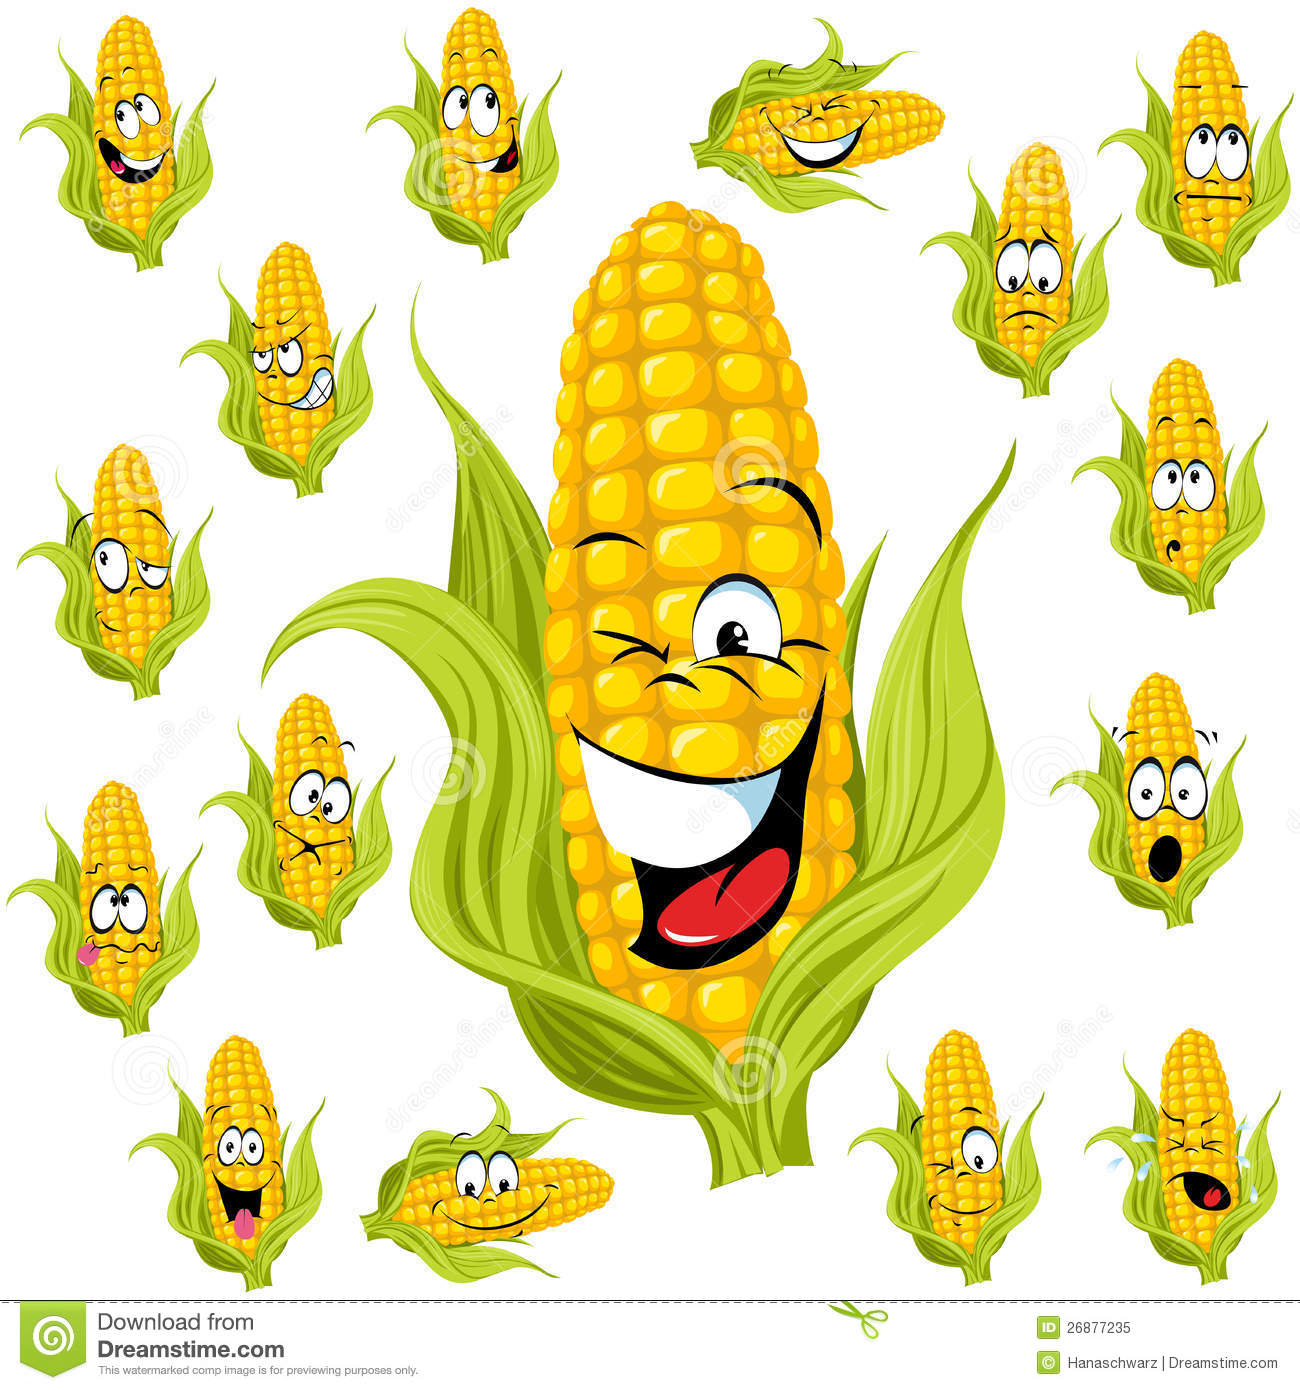 Sweet Corn Cartoon With Many Expressions 